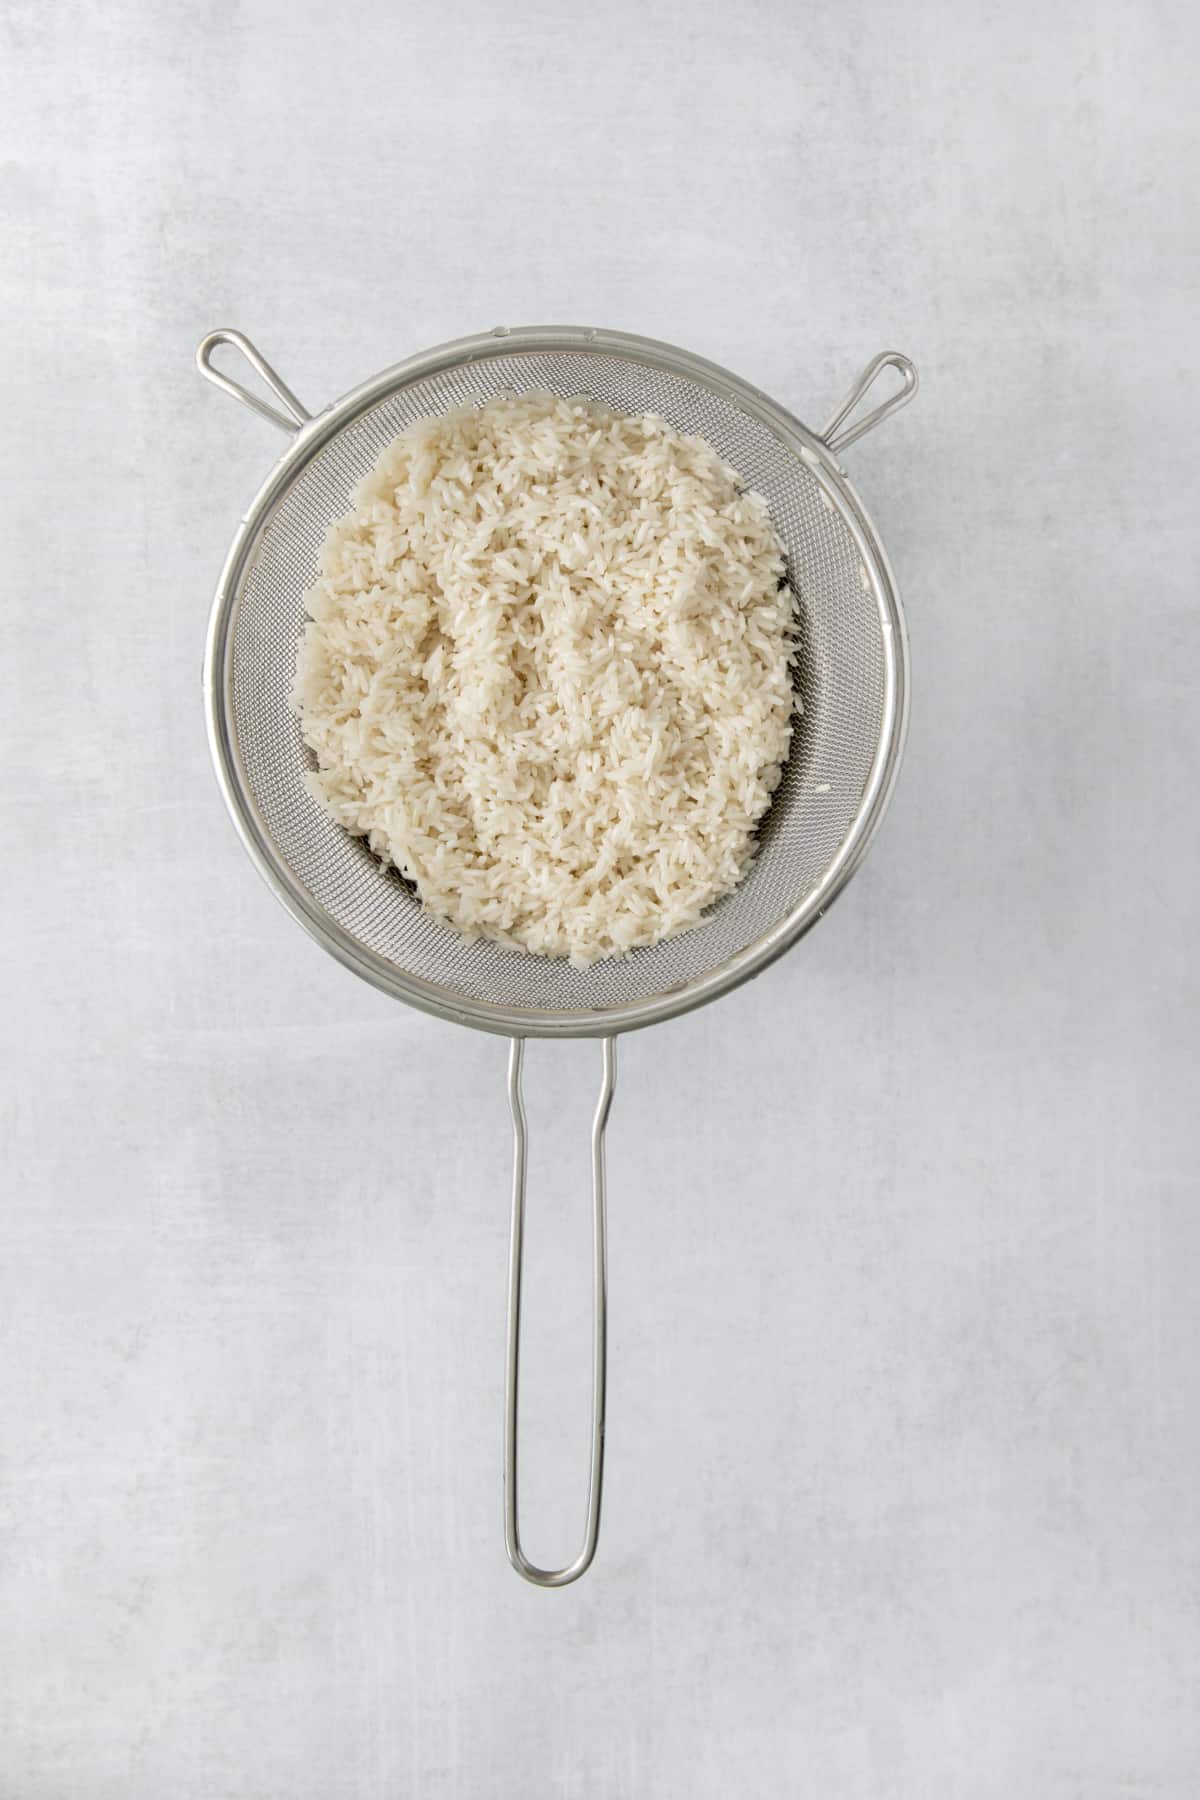 rinsed rice in a sieve.